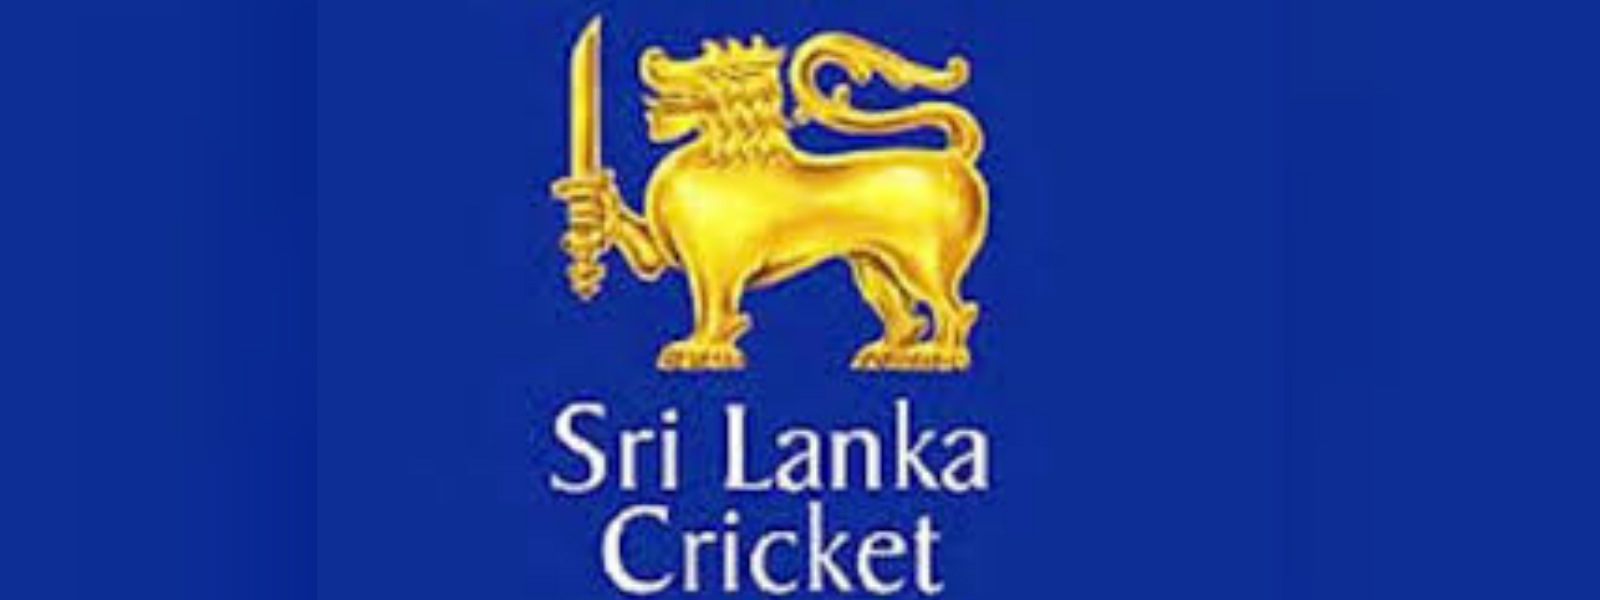 Law yet to be enforced against corrupt SLC members